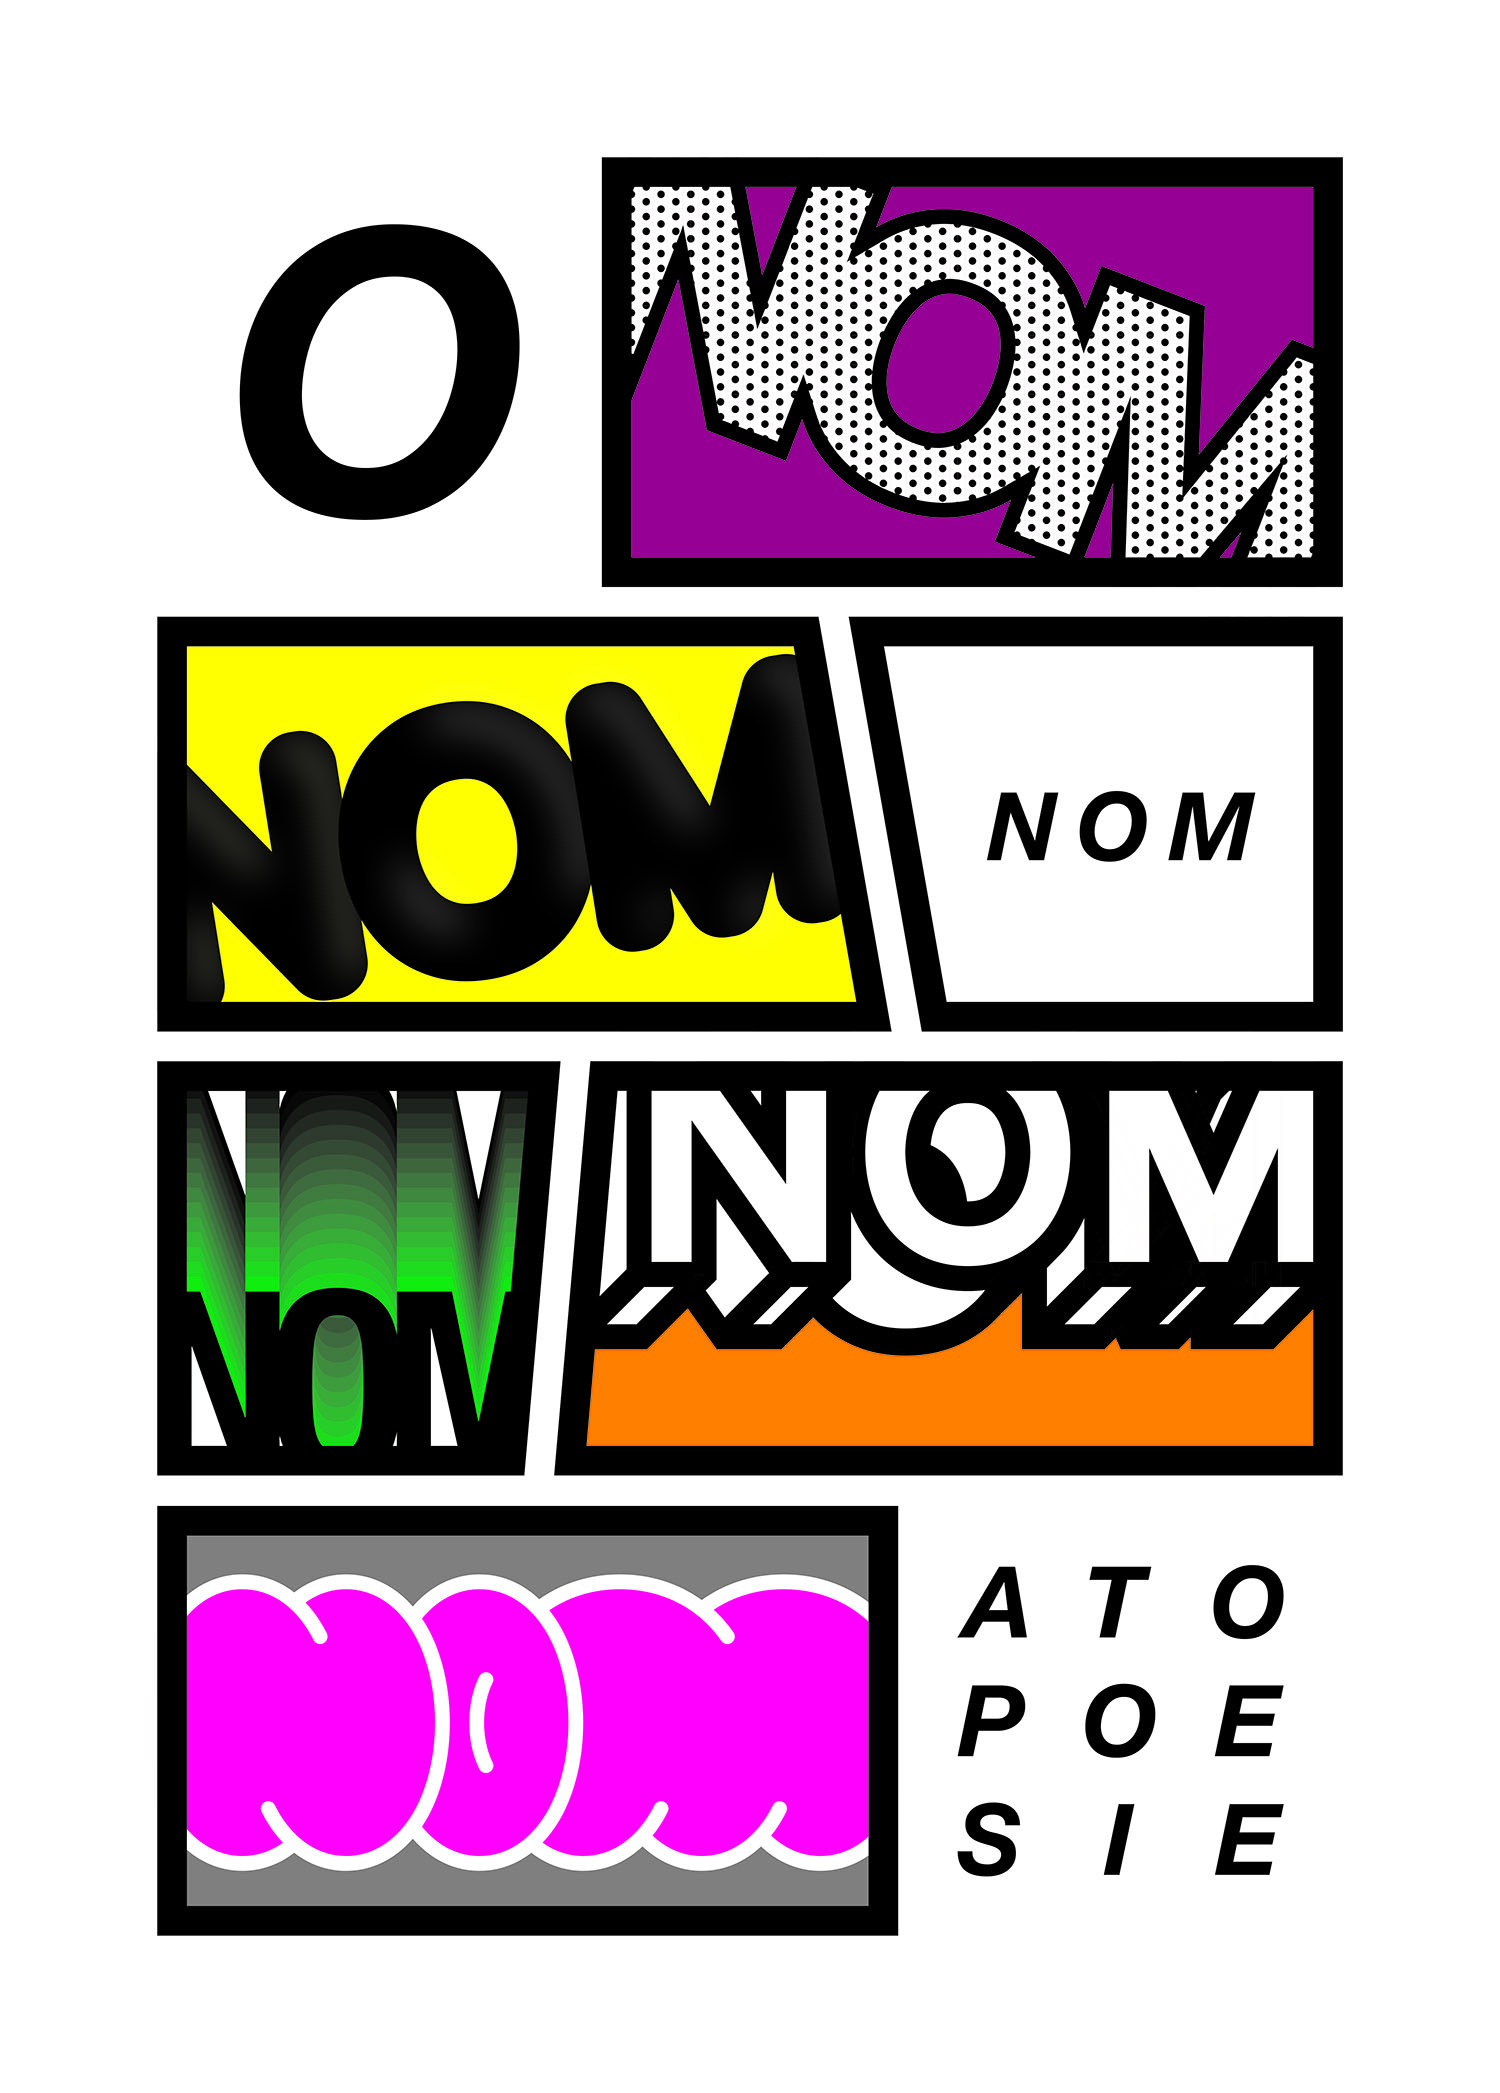 NOM by Hyo-Song Becker - Creative Work